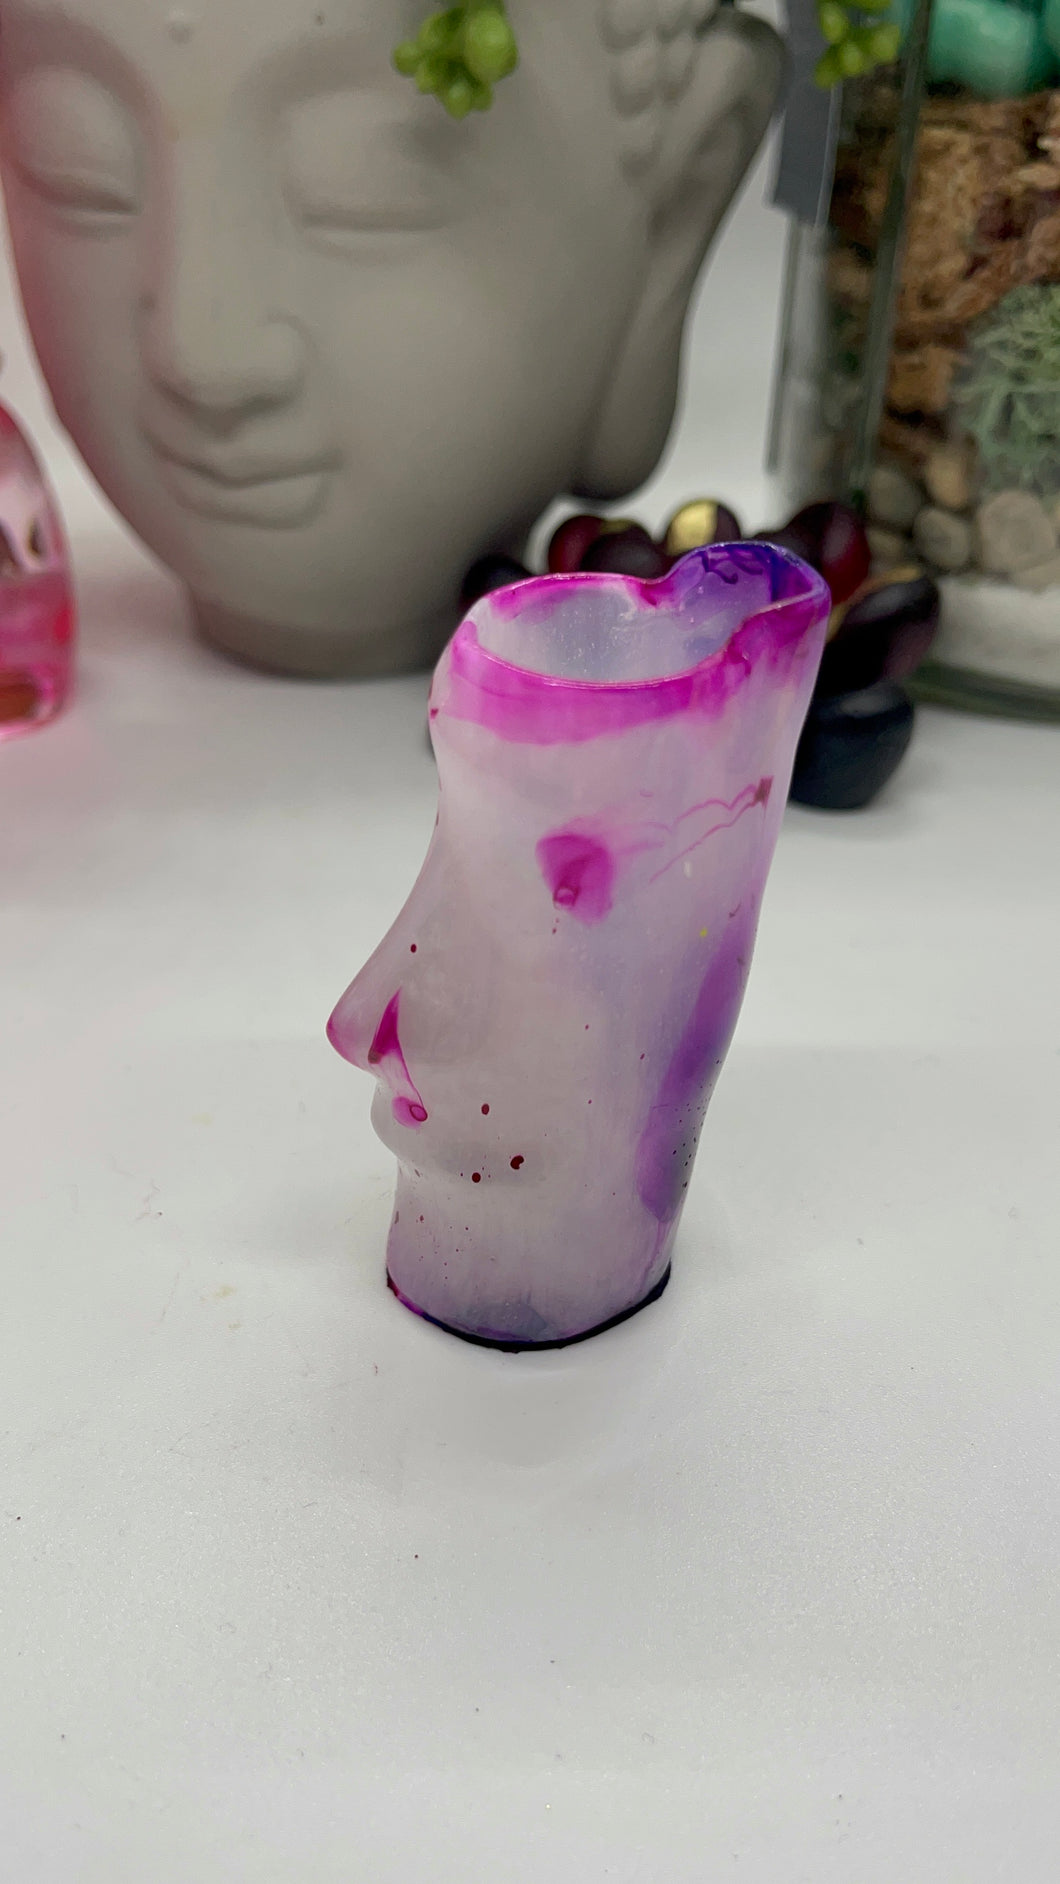 Purple and White Moai Clipper Lighter Sleeve